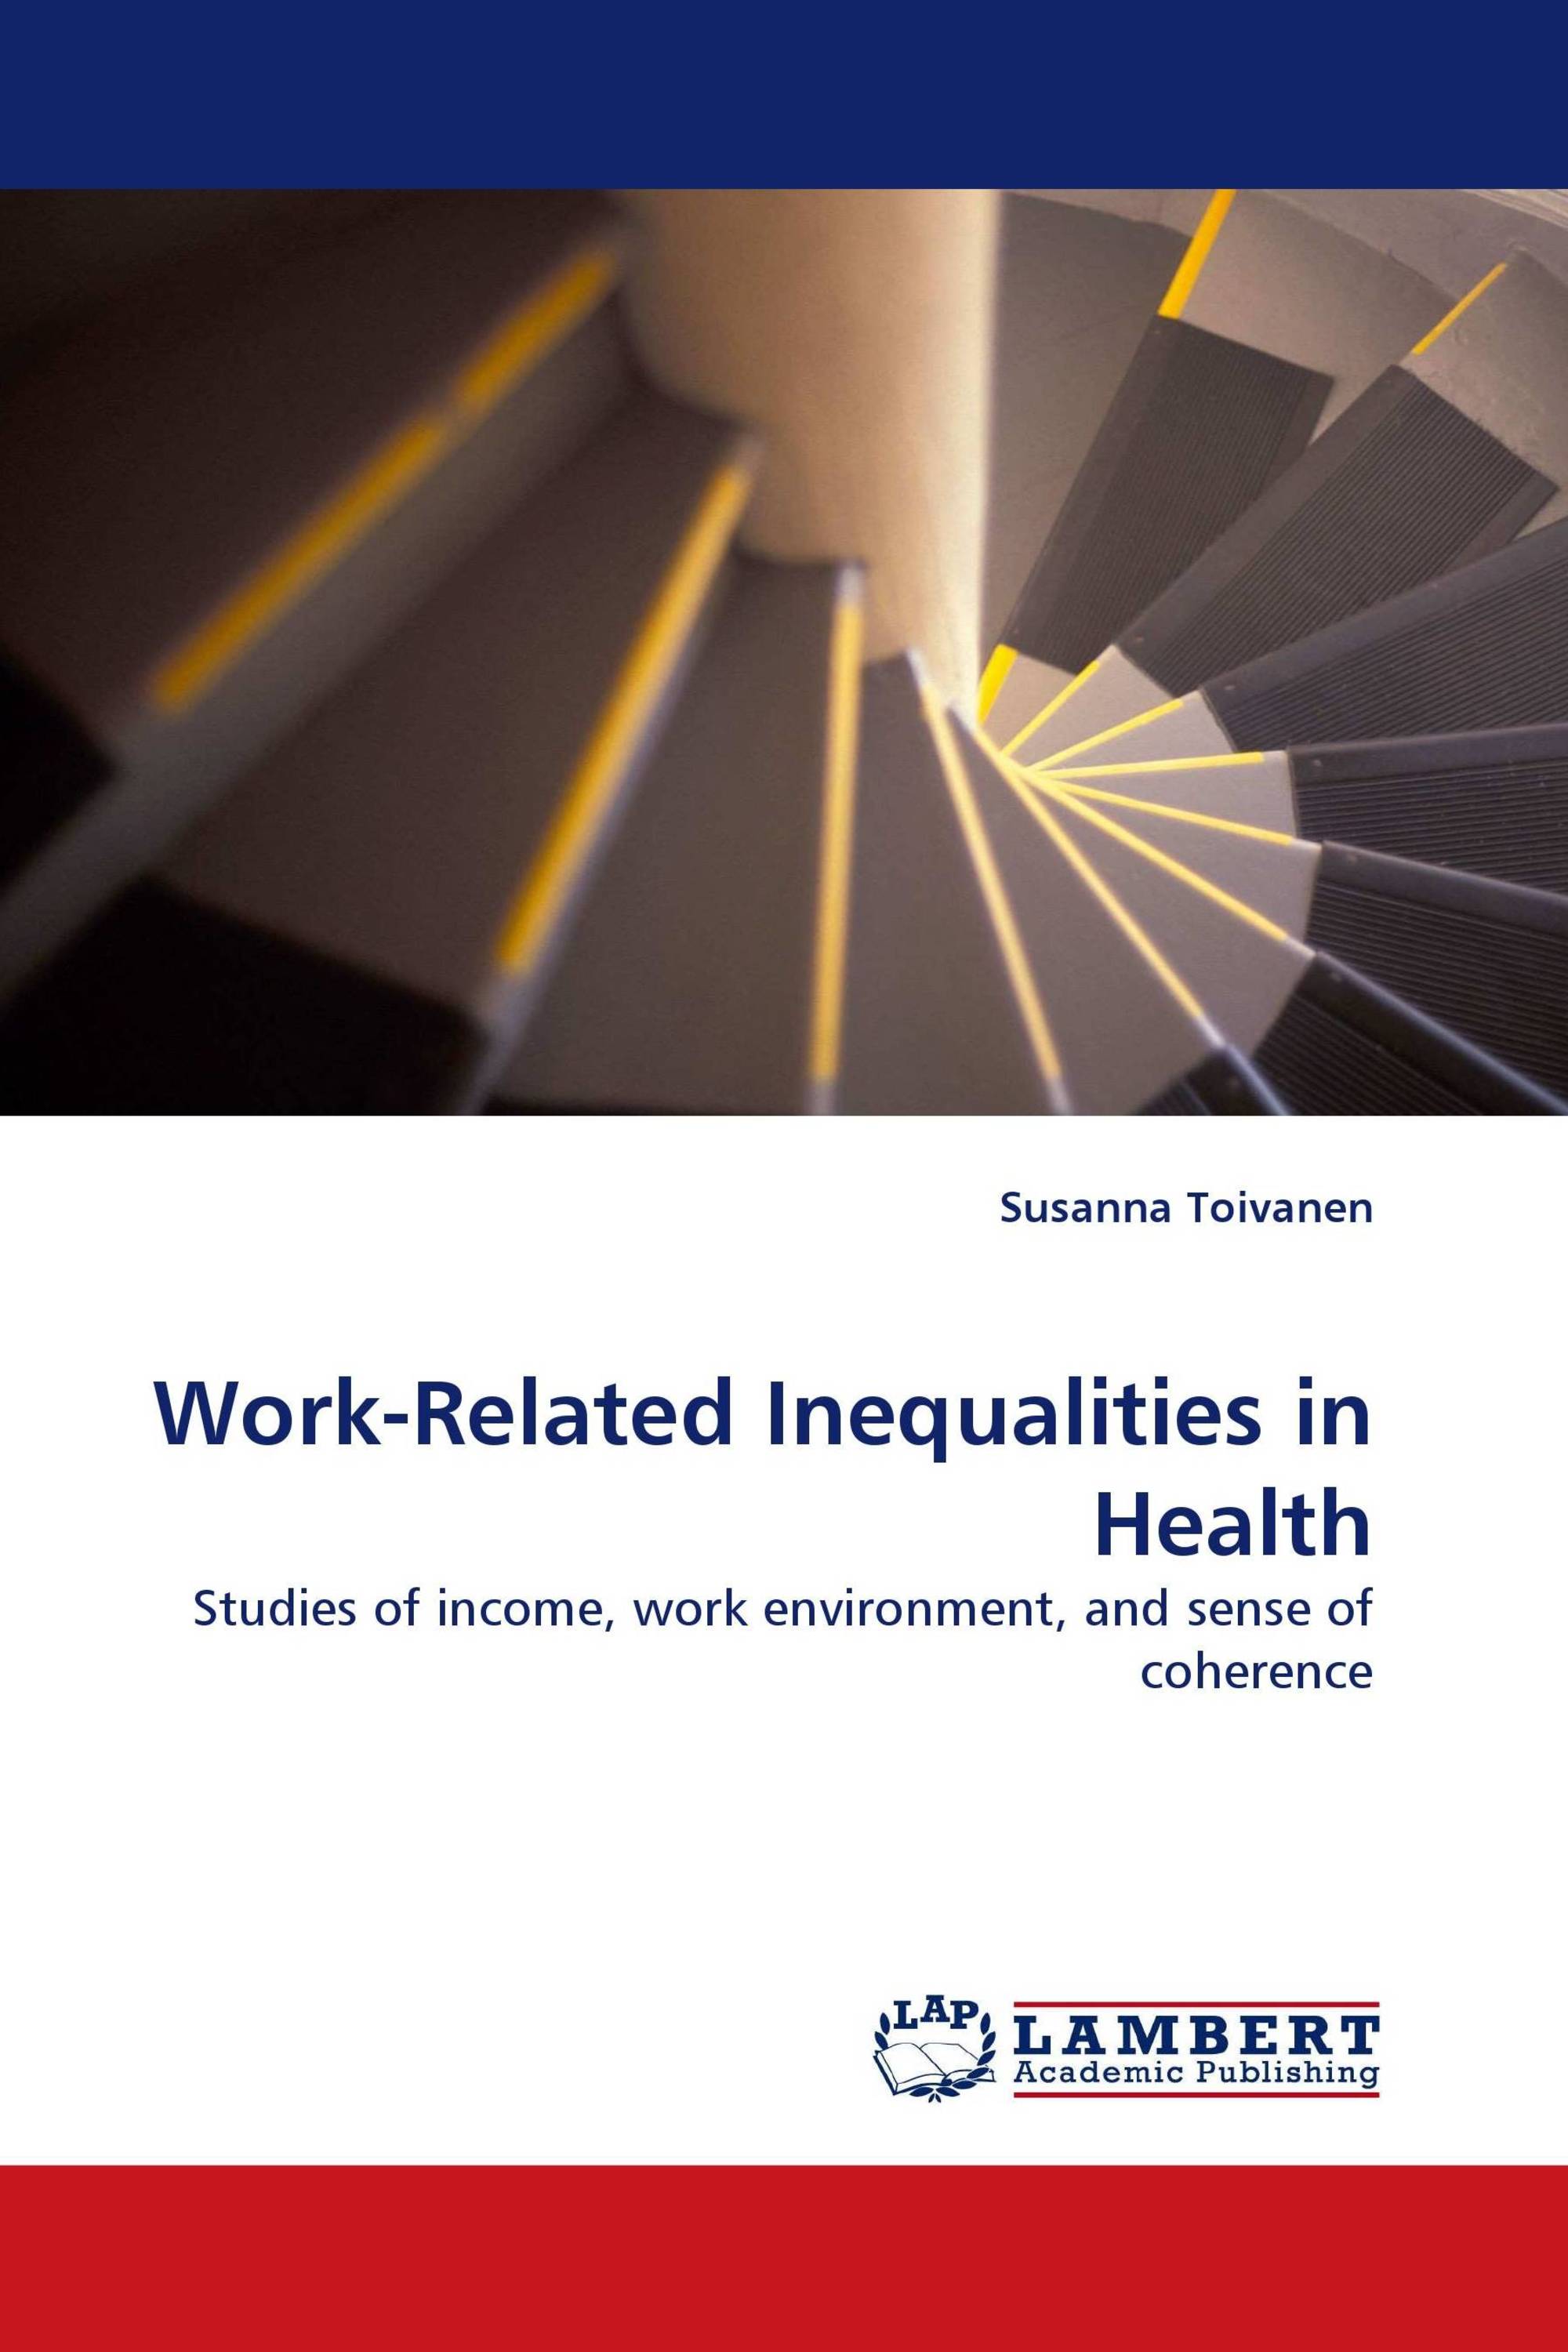 Work-Related Inequalities in Health